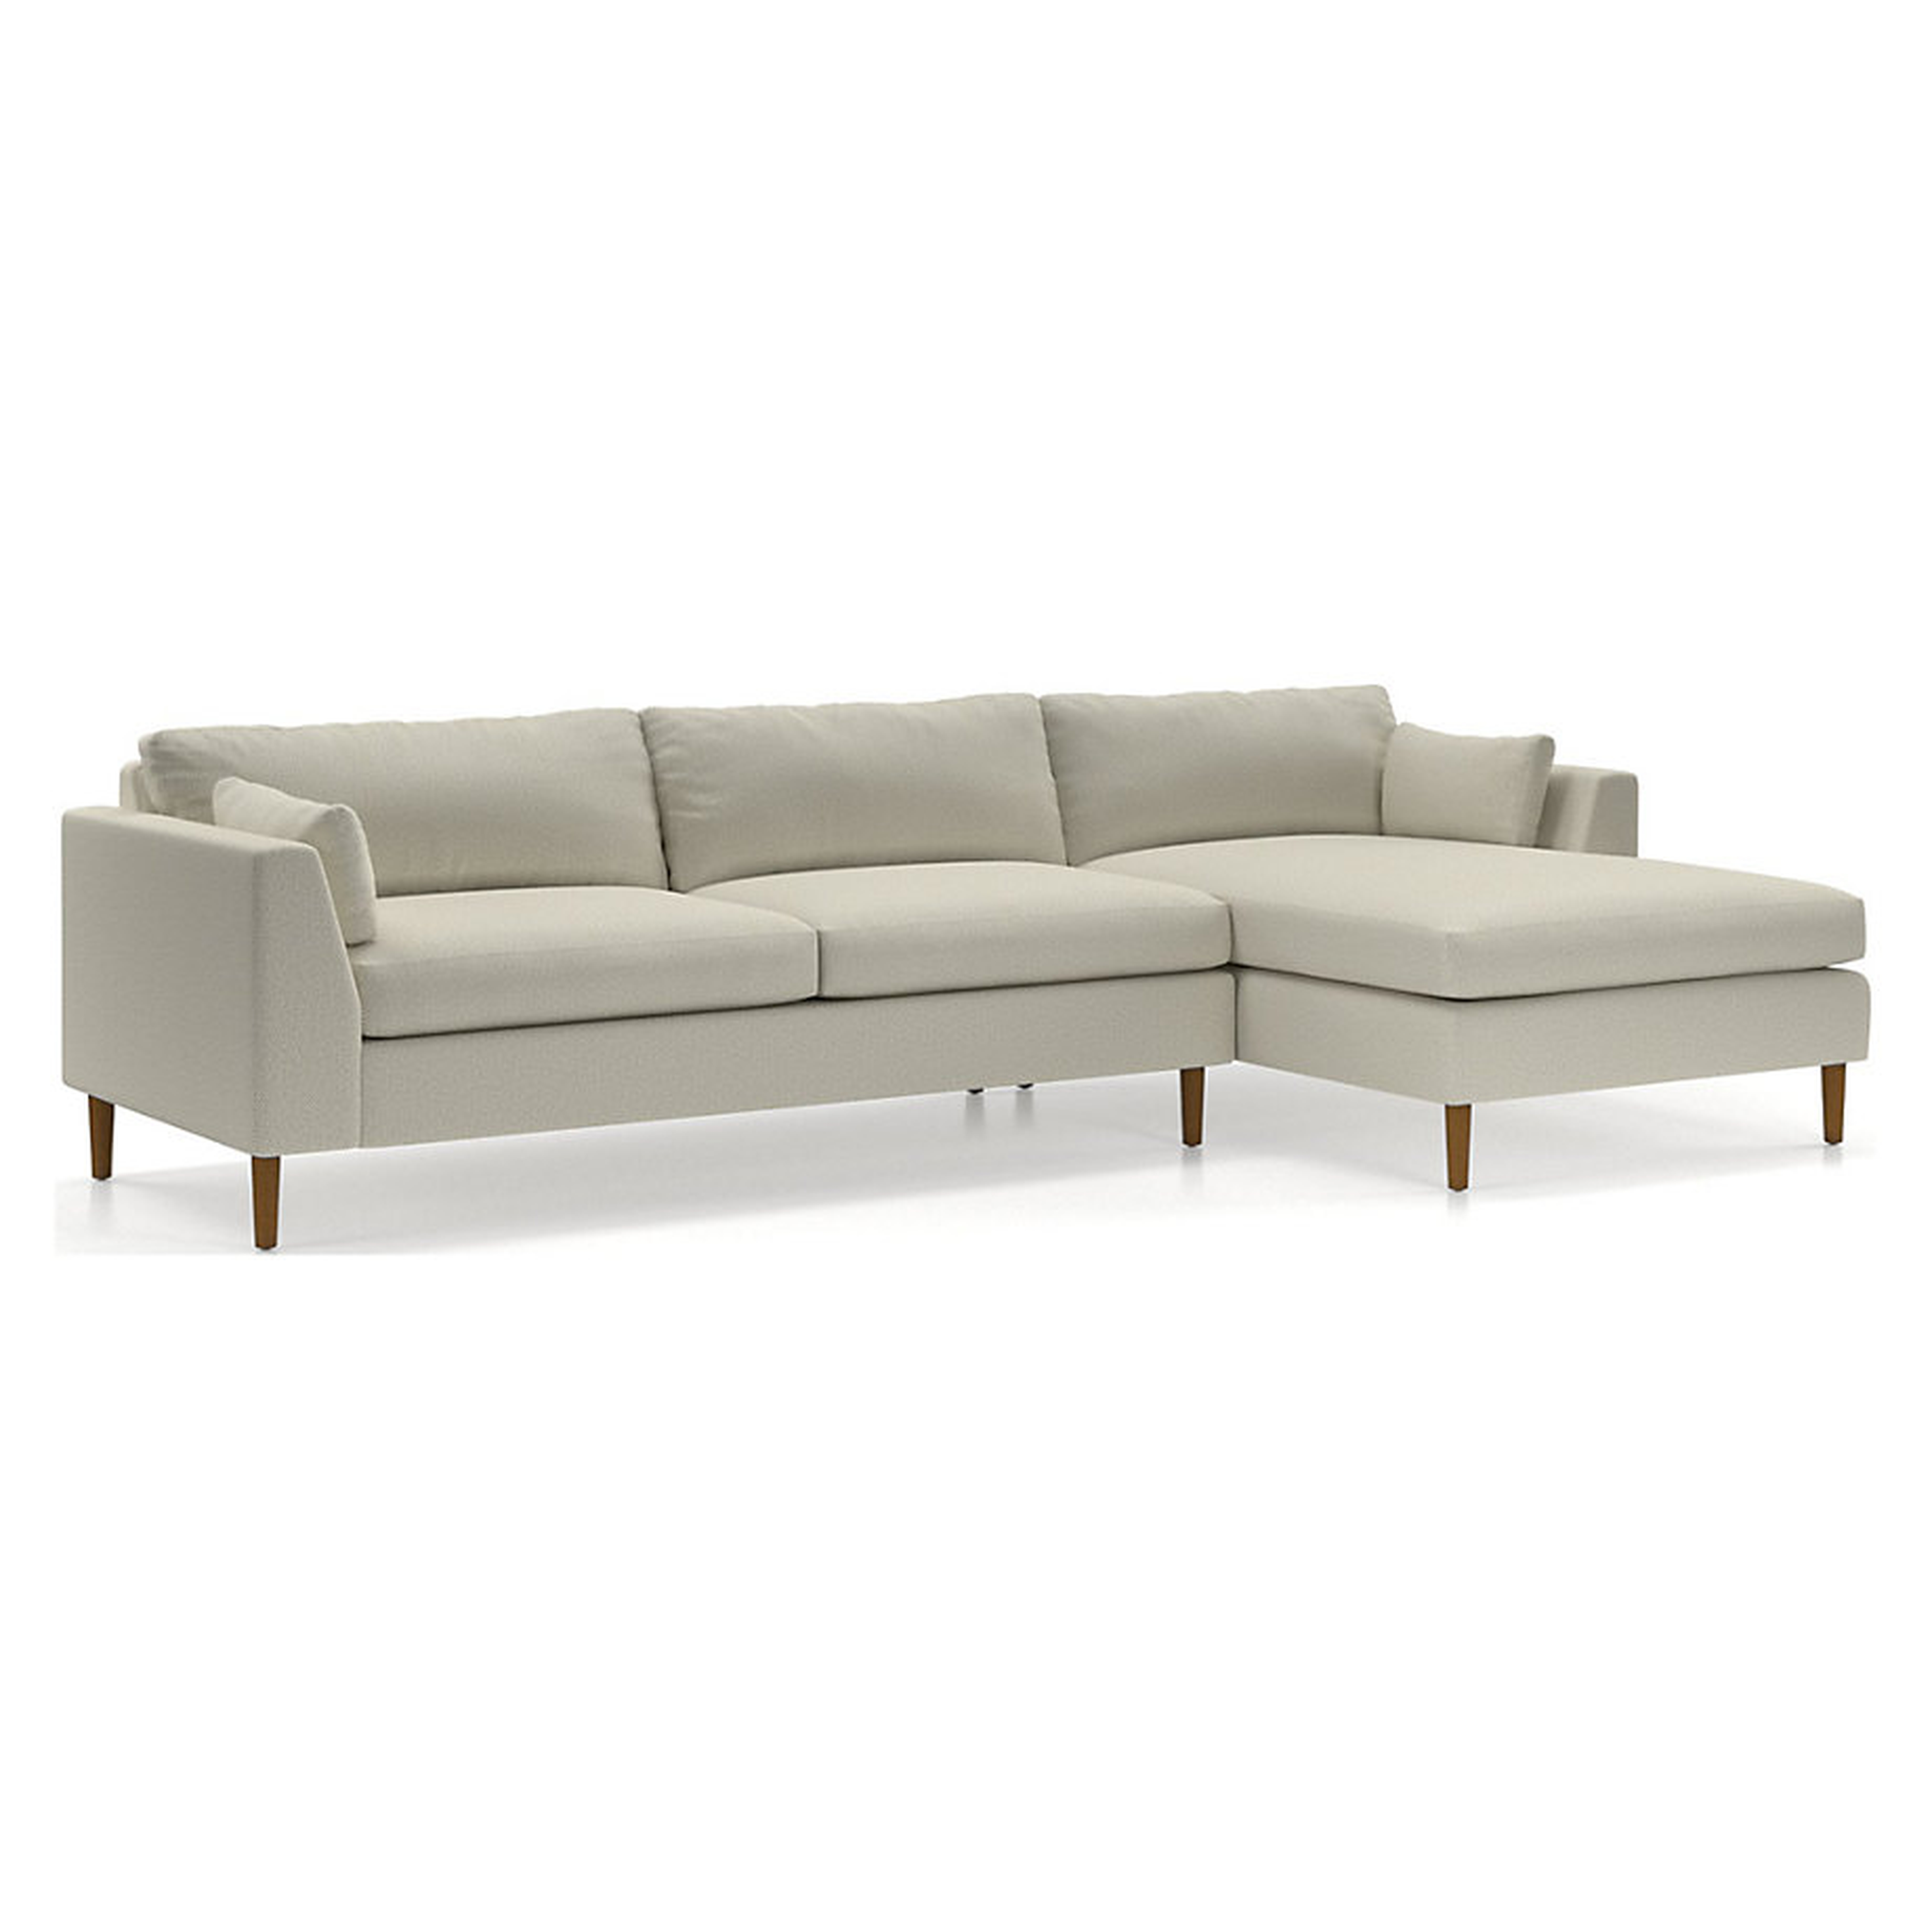 Avondale Wood Leg 2-Piece Sectional - Crate and Barrel